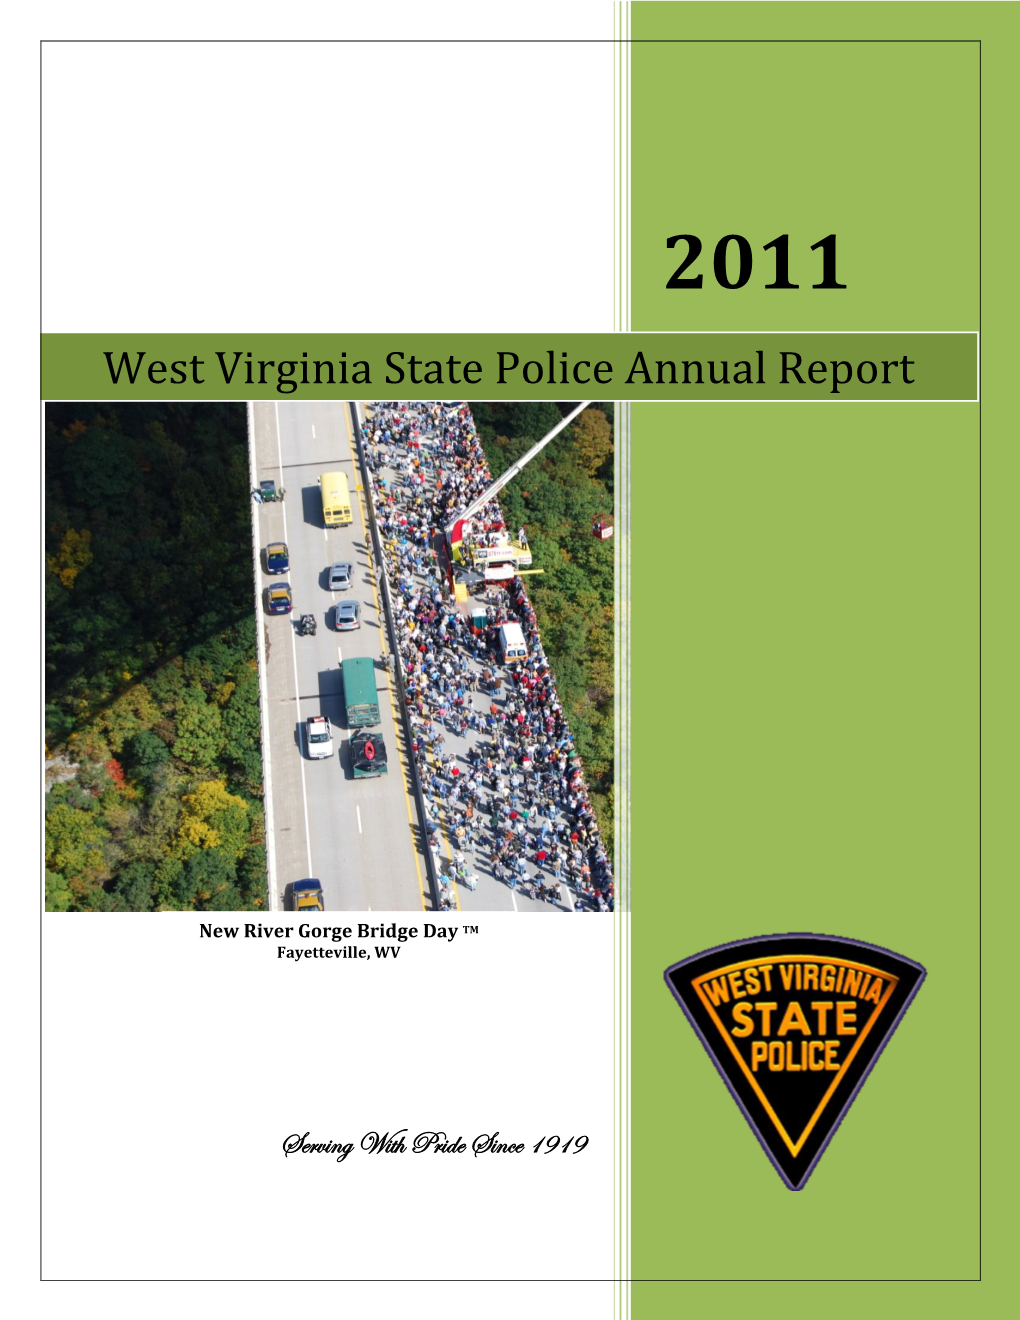 West Virginia State Police Annual Report